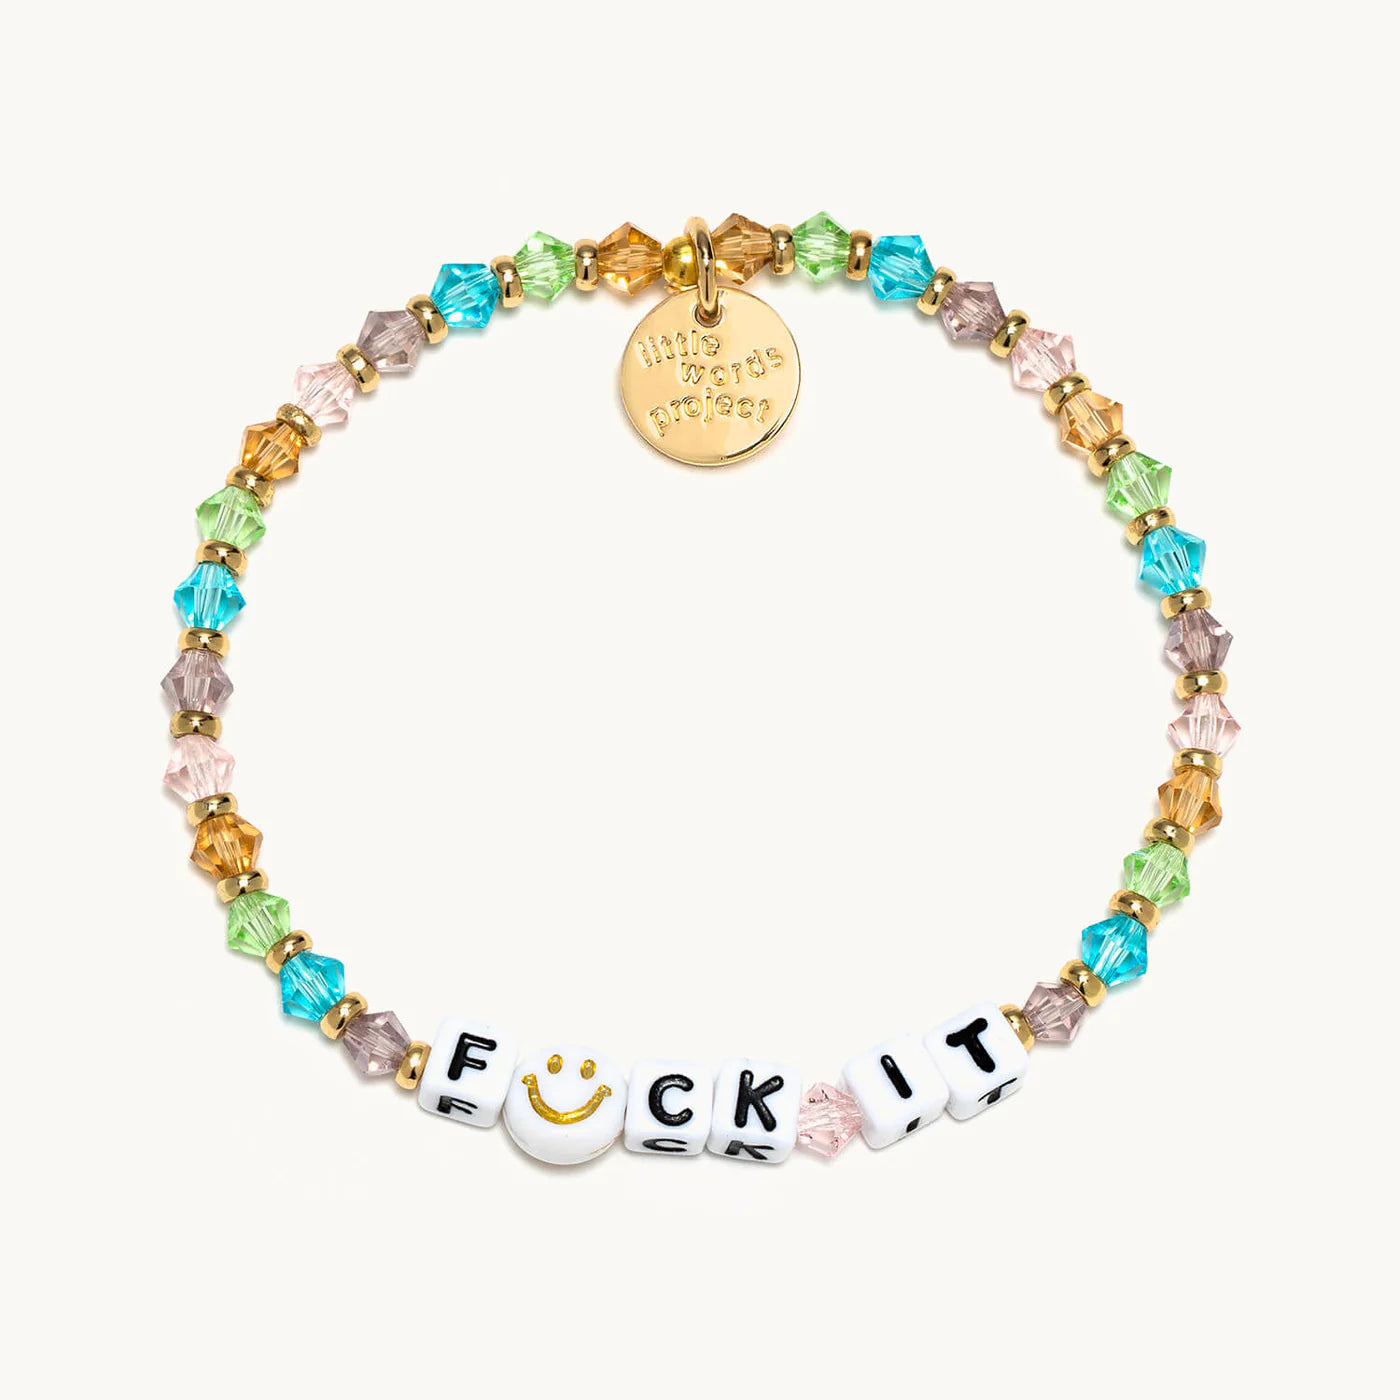 This beaded bracelet comes from Little Words Project®. It reads "Fuck It".